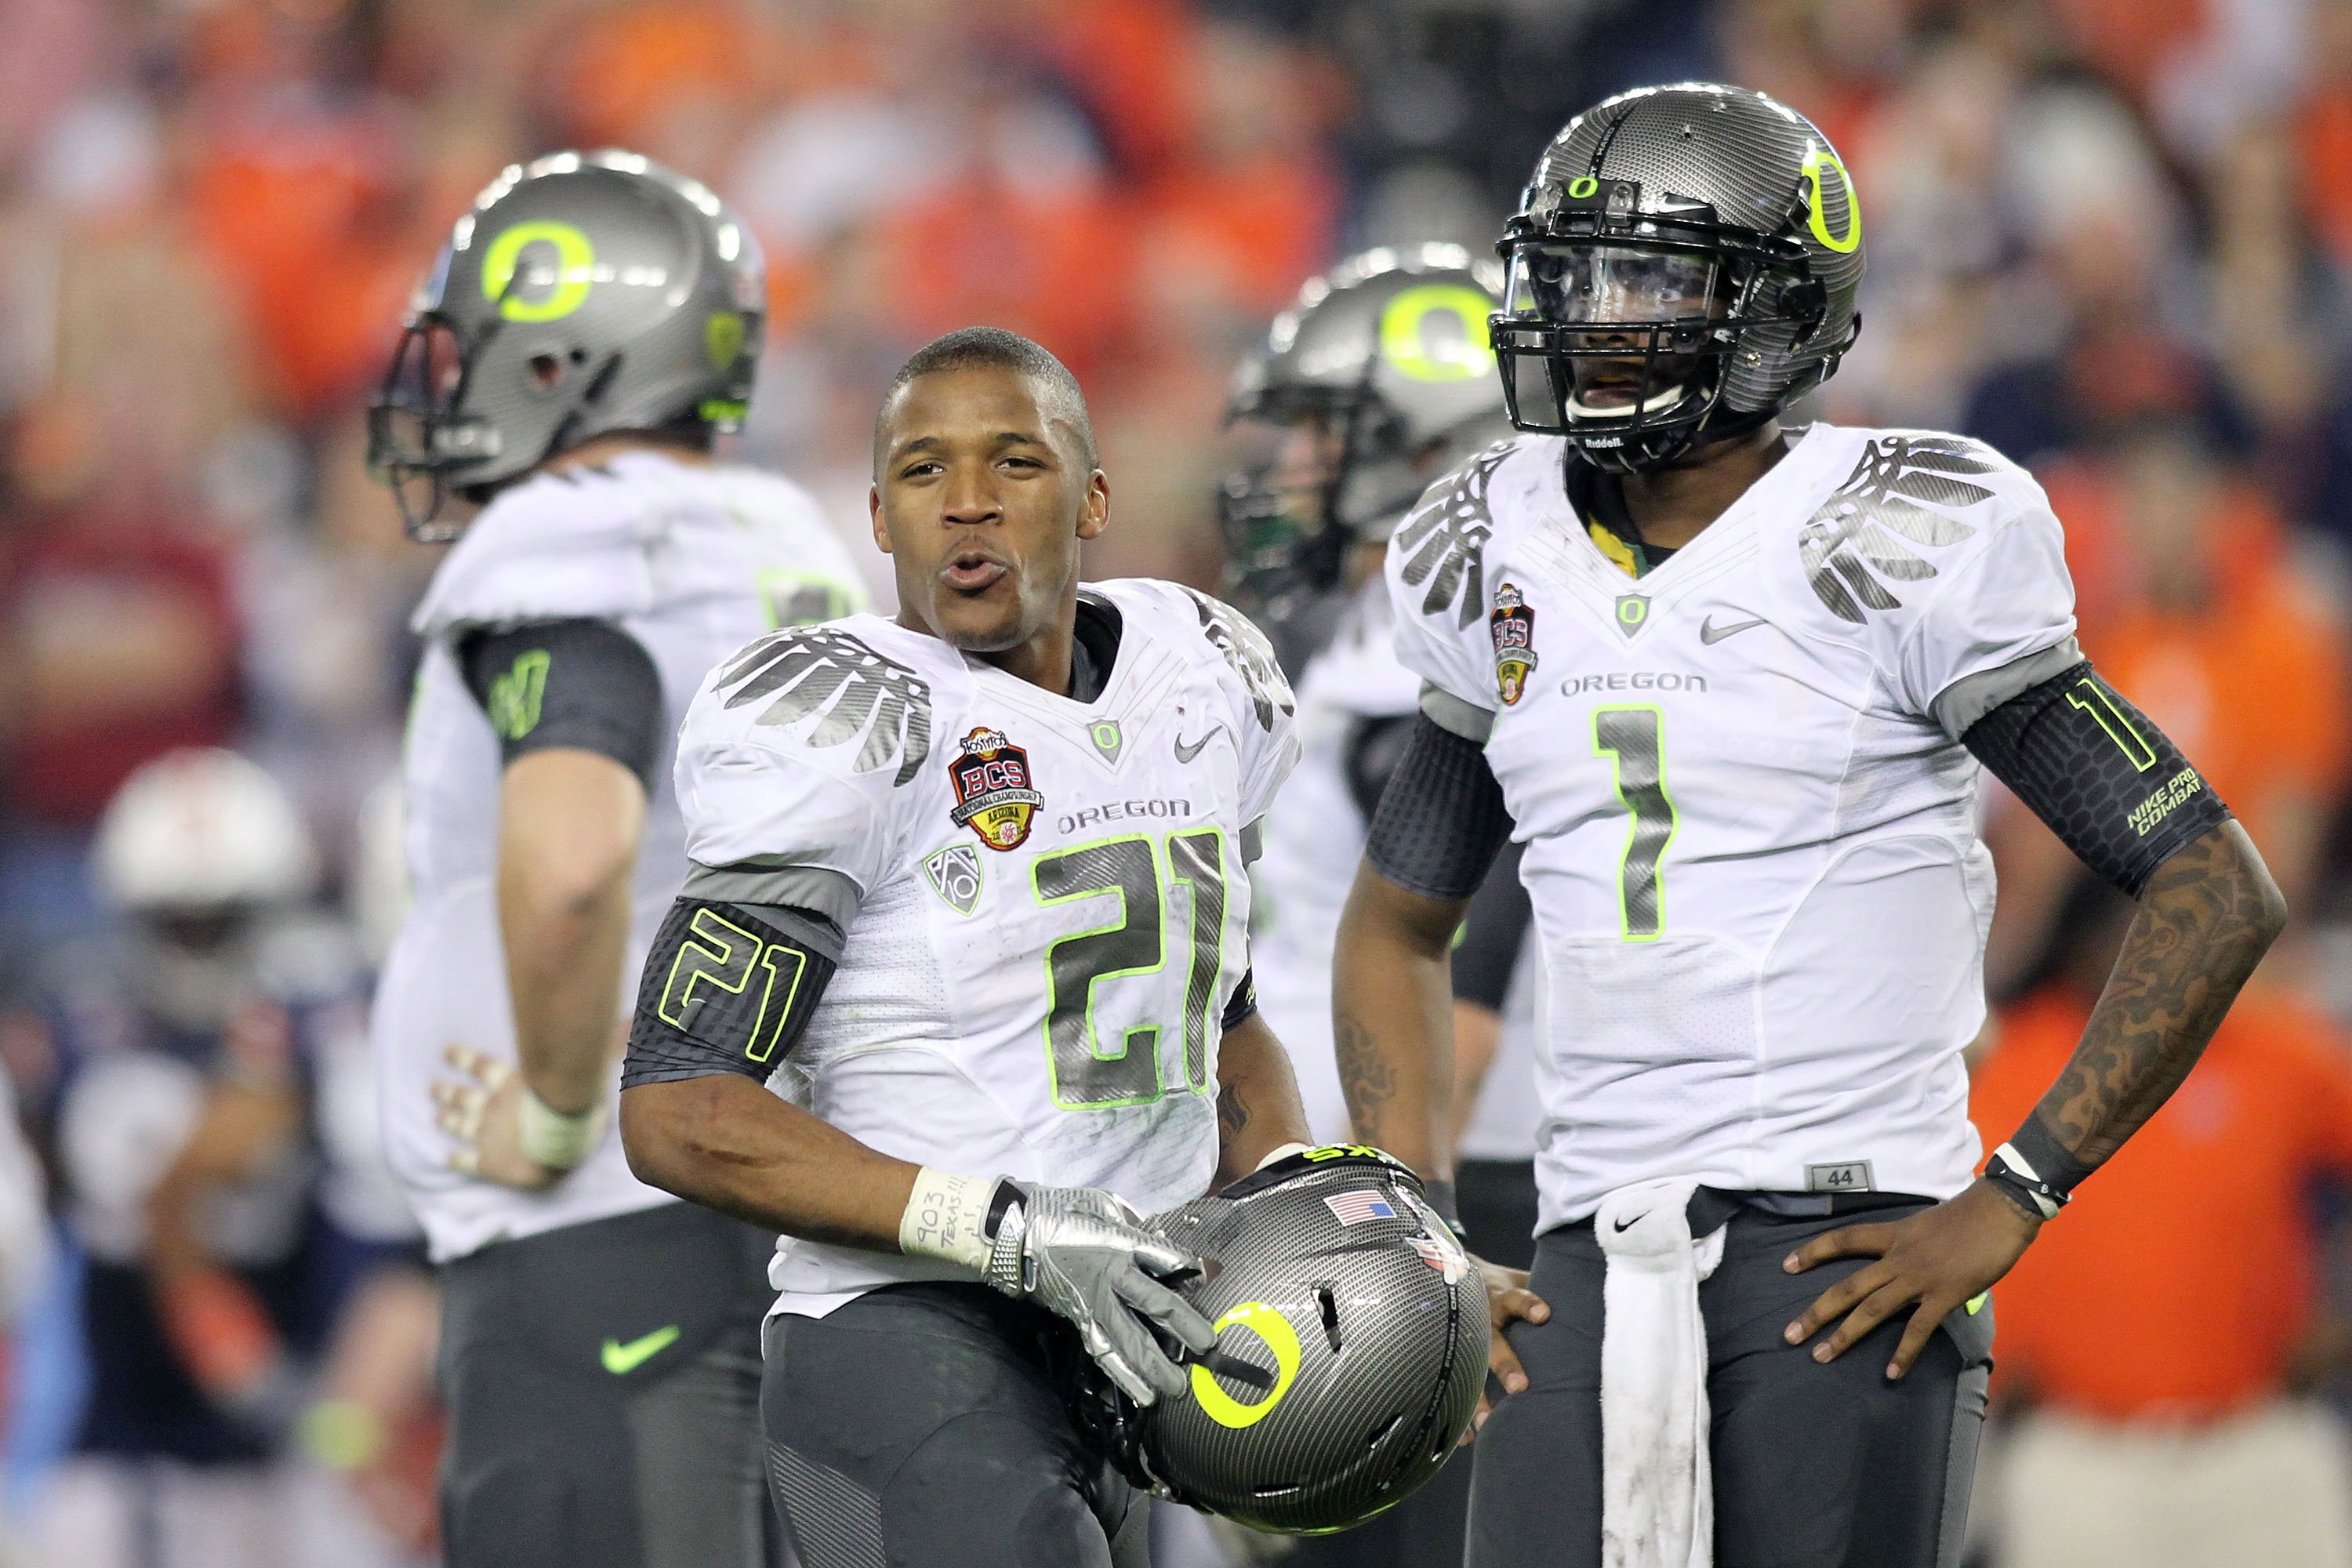 2011 College Football Top 25 Predictions: Why Oregon Should Be No. 1, News, Scores, Highlights, Stats, and Rumors